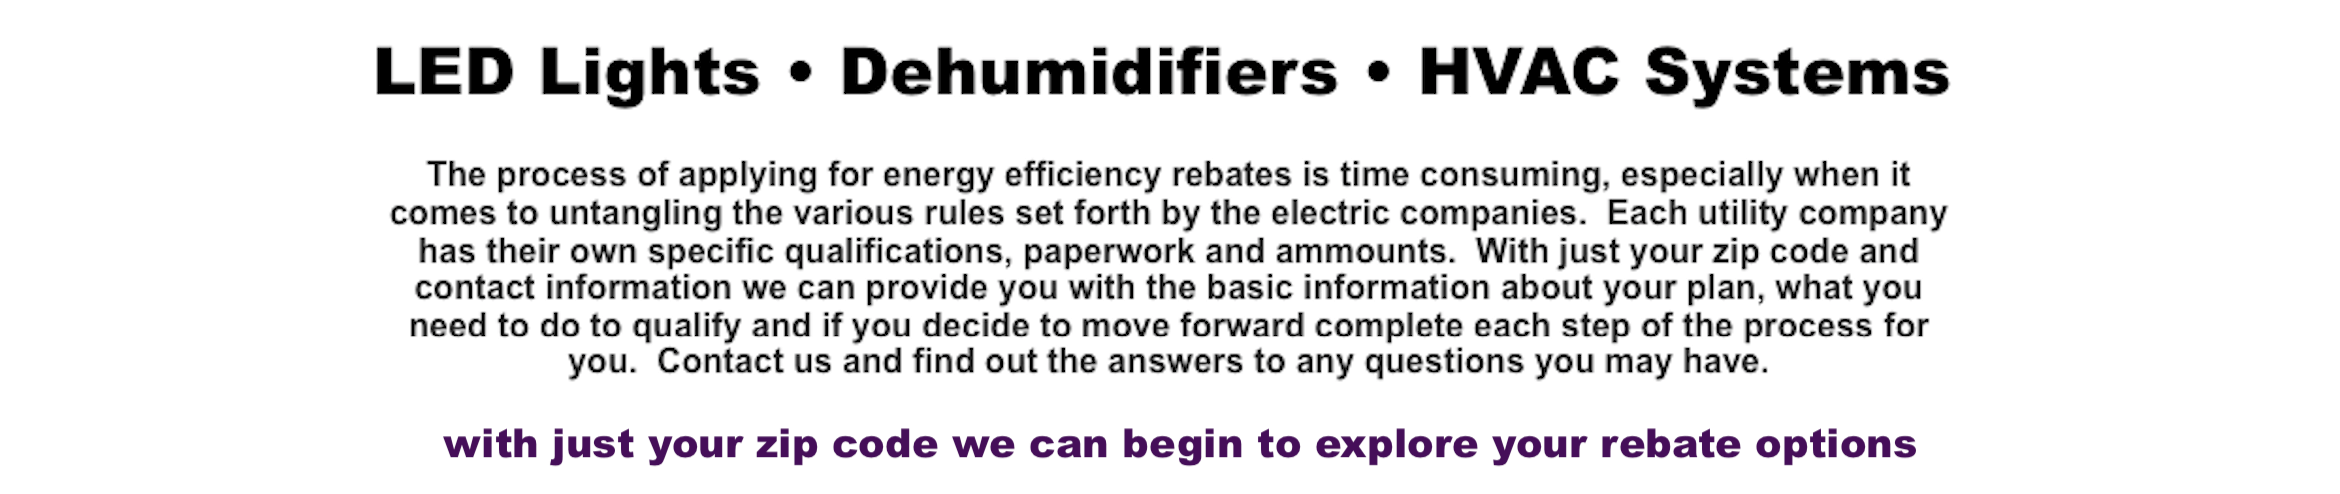 Rebates for the Horticulture Industry.  LED LIGHTS, Dehumidifers, HVAC Systems